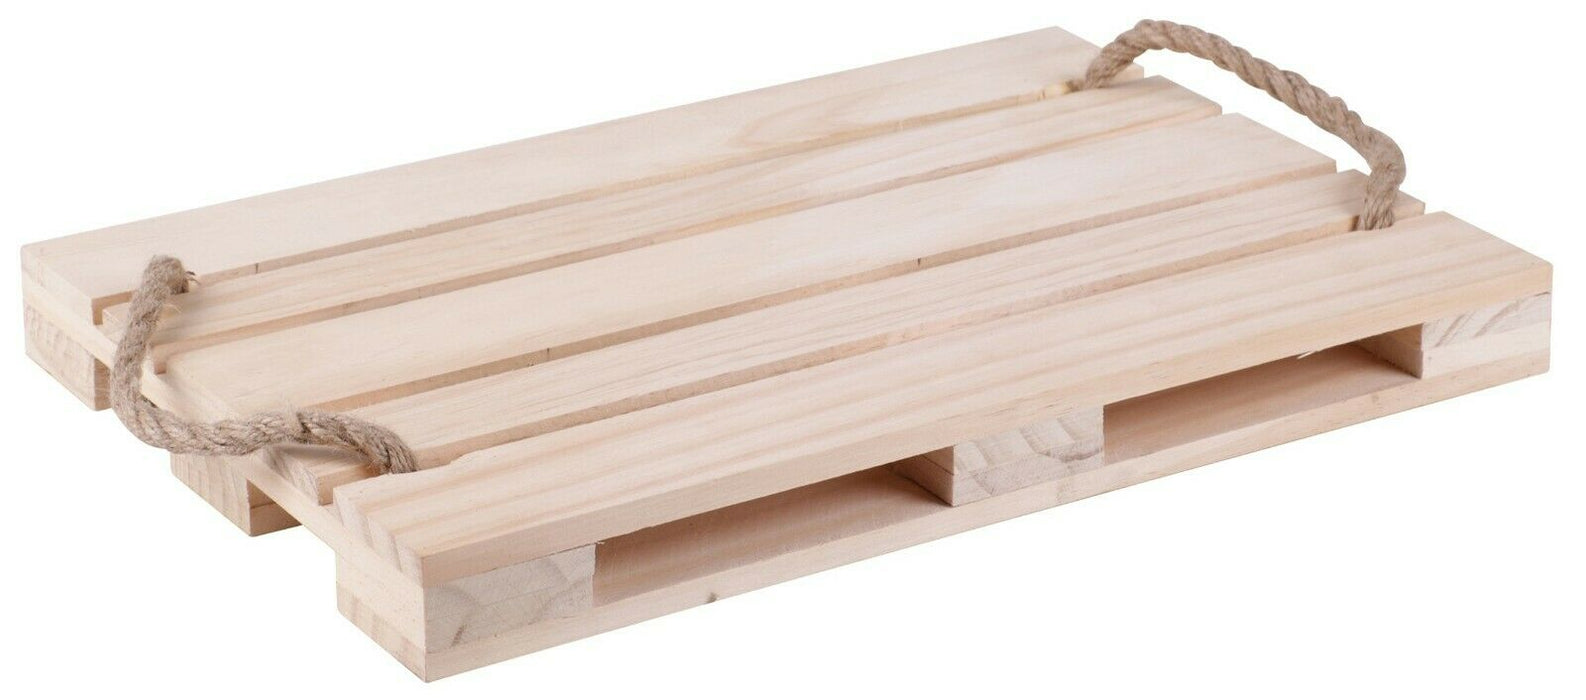 Wooden Pallete Style Serving Tray 28 x 38cm Fruit Display, Dessert Tray